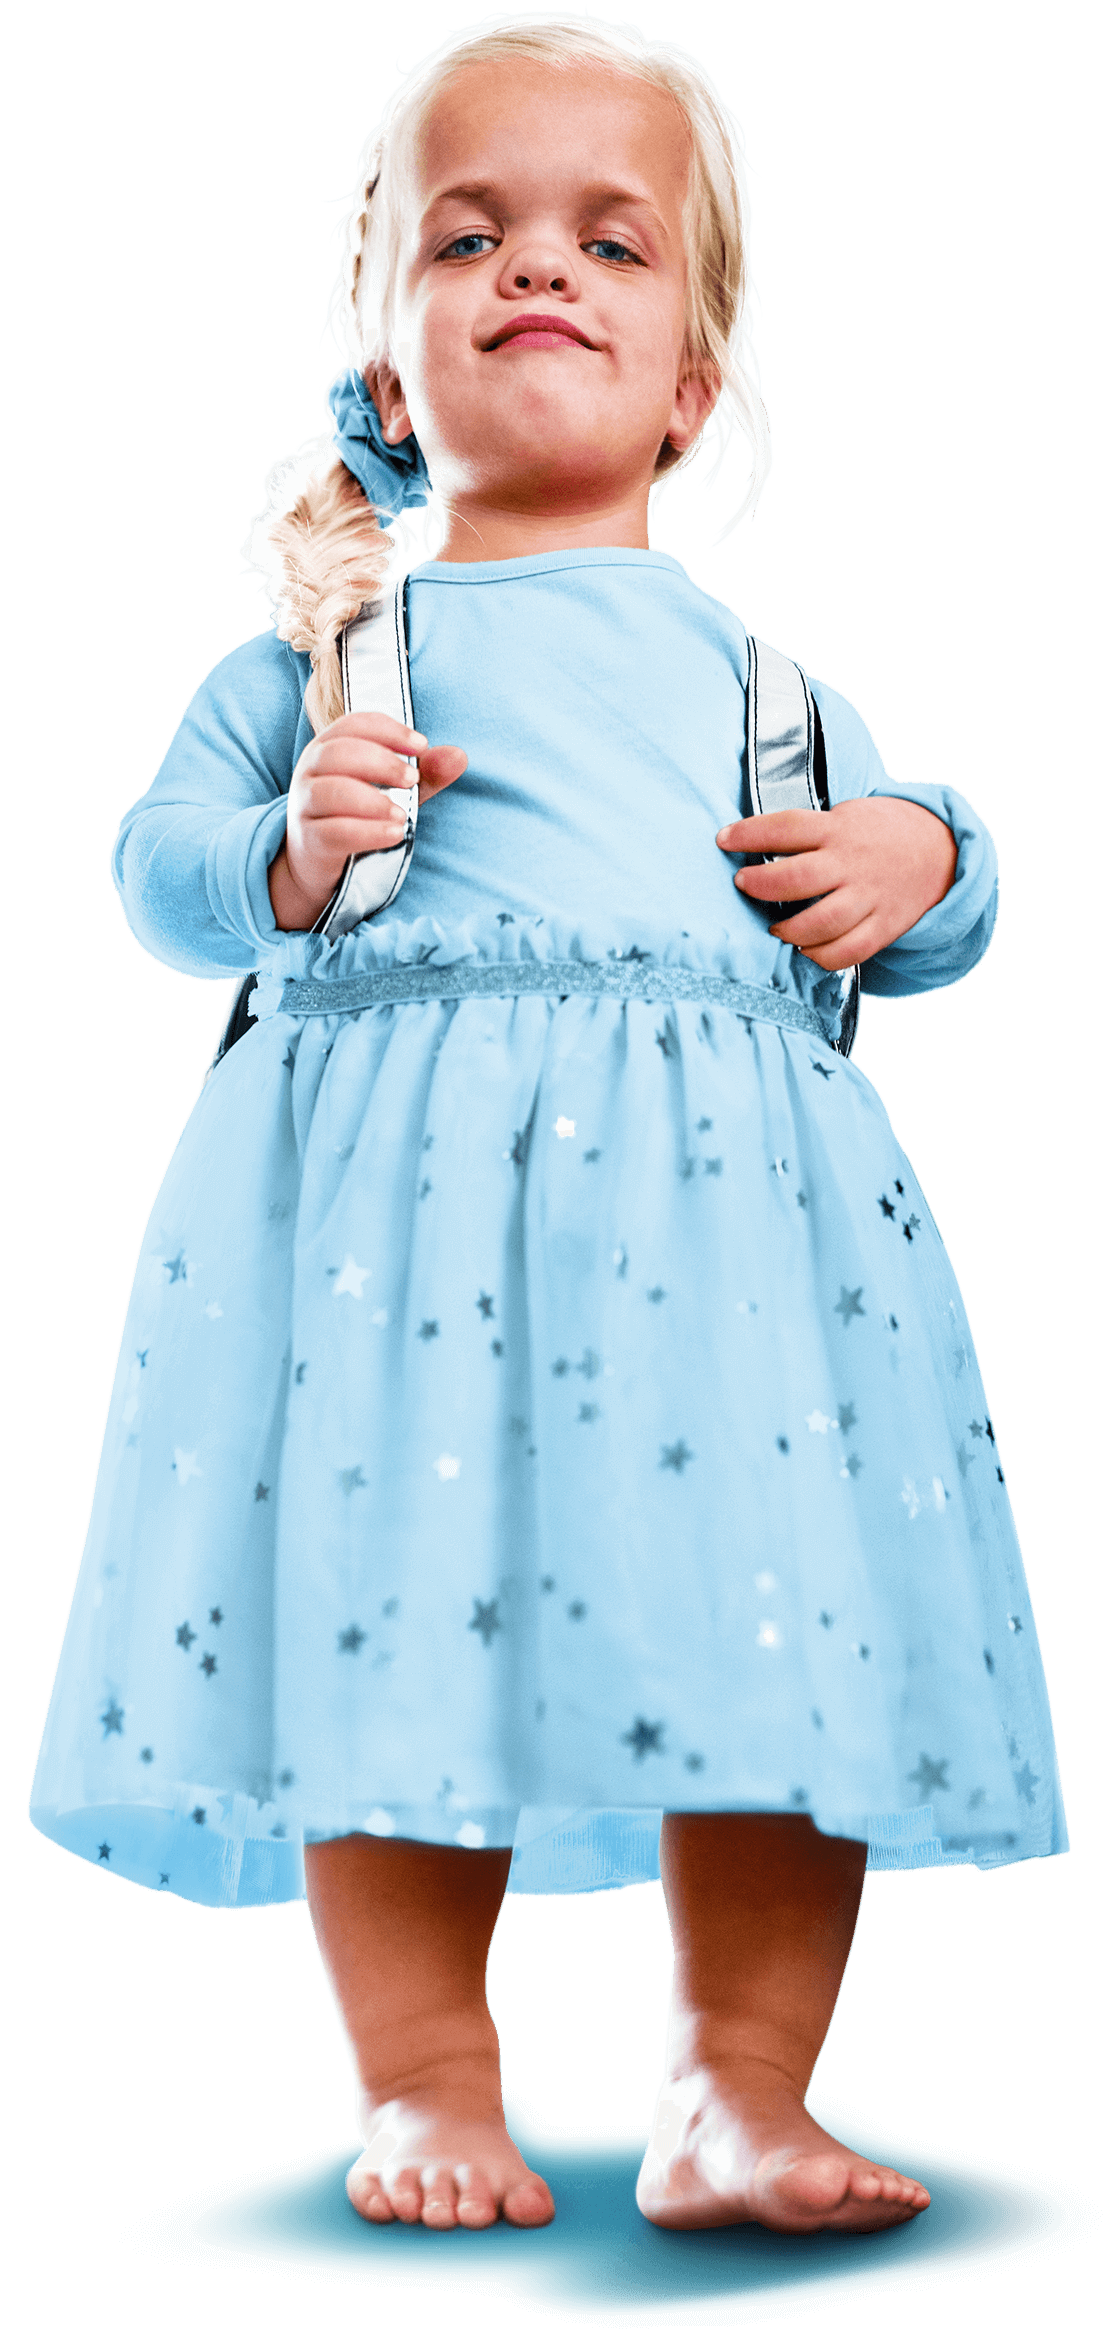 A young girl in a blue dress with impaired bone growth from Achondroplasia